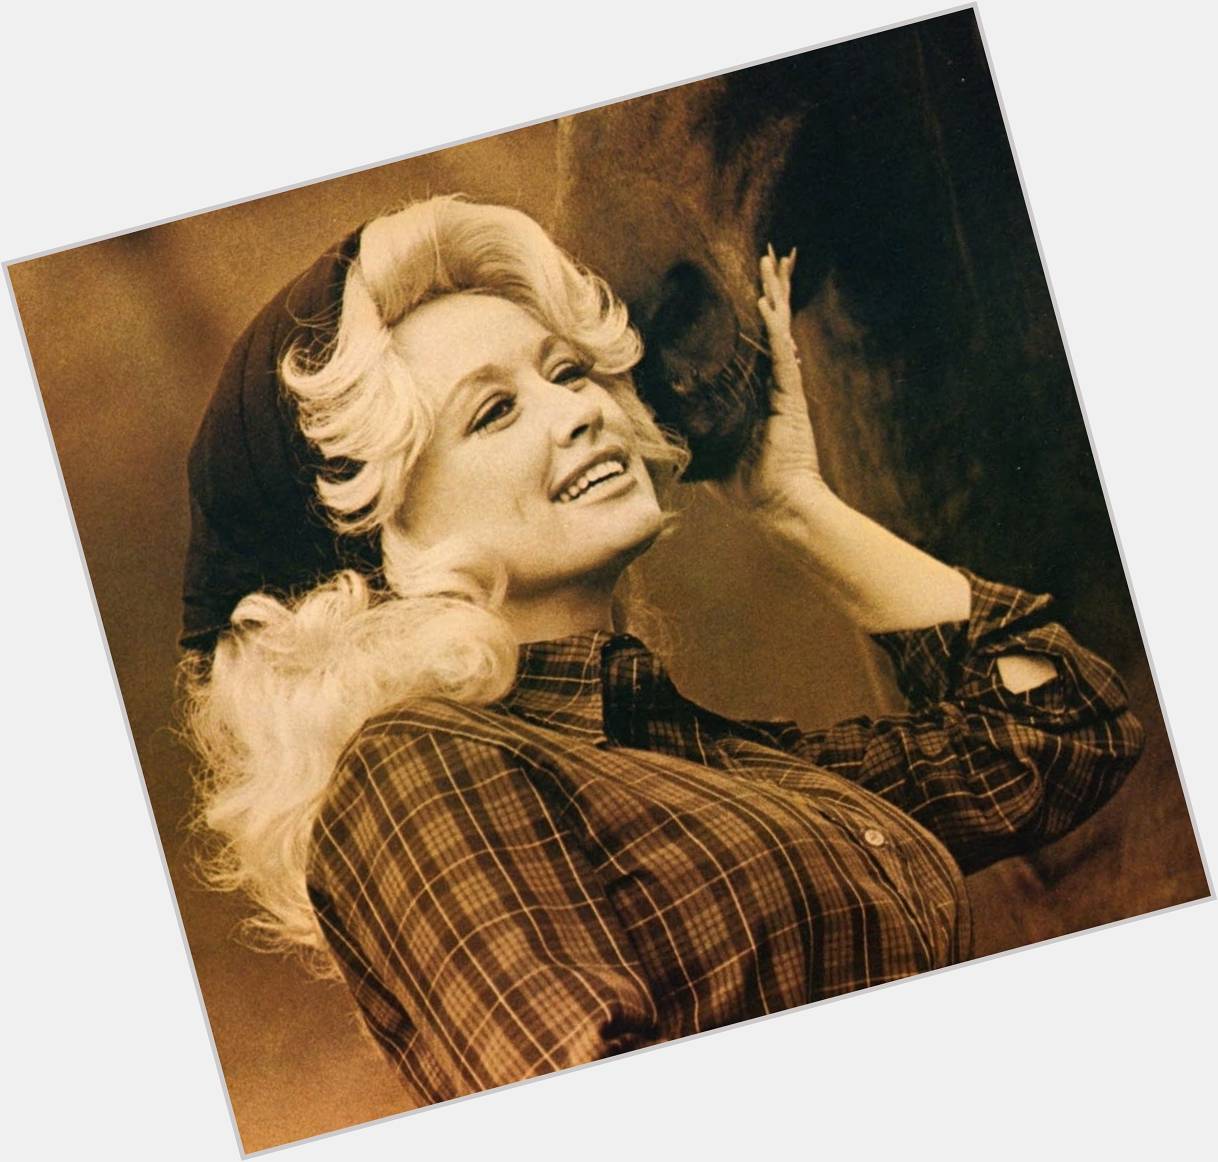 Today in 1946, Dolly Parton was born, making her 72 today. Happy Birthday, Dolly!  